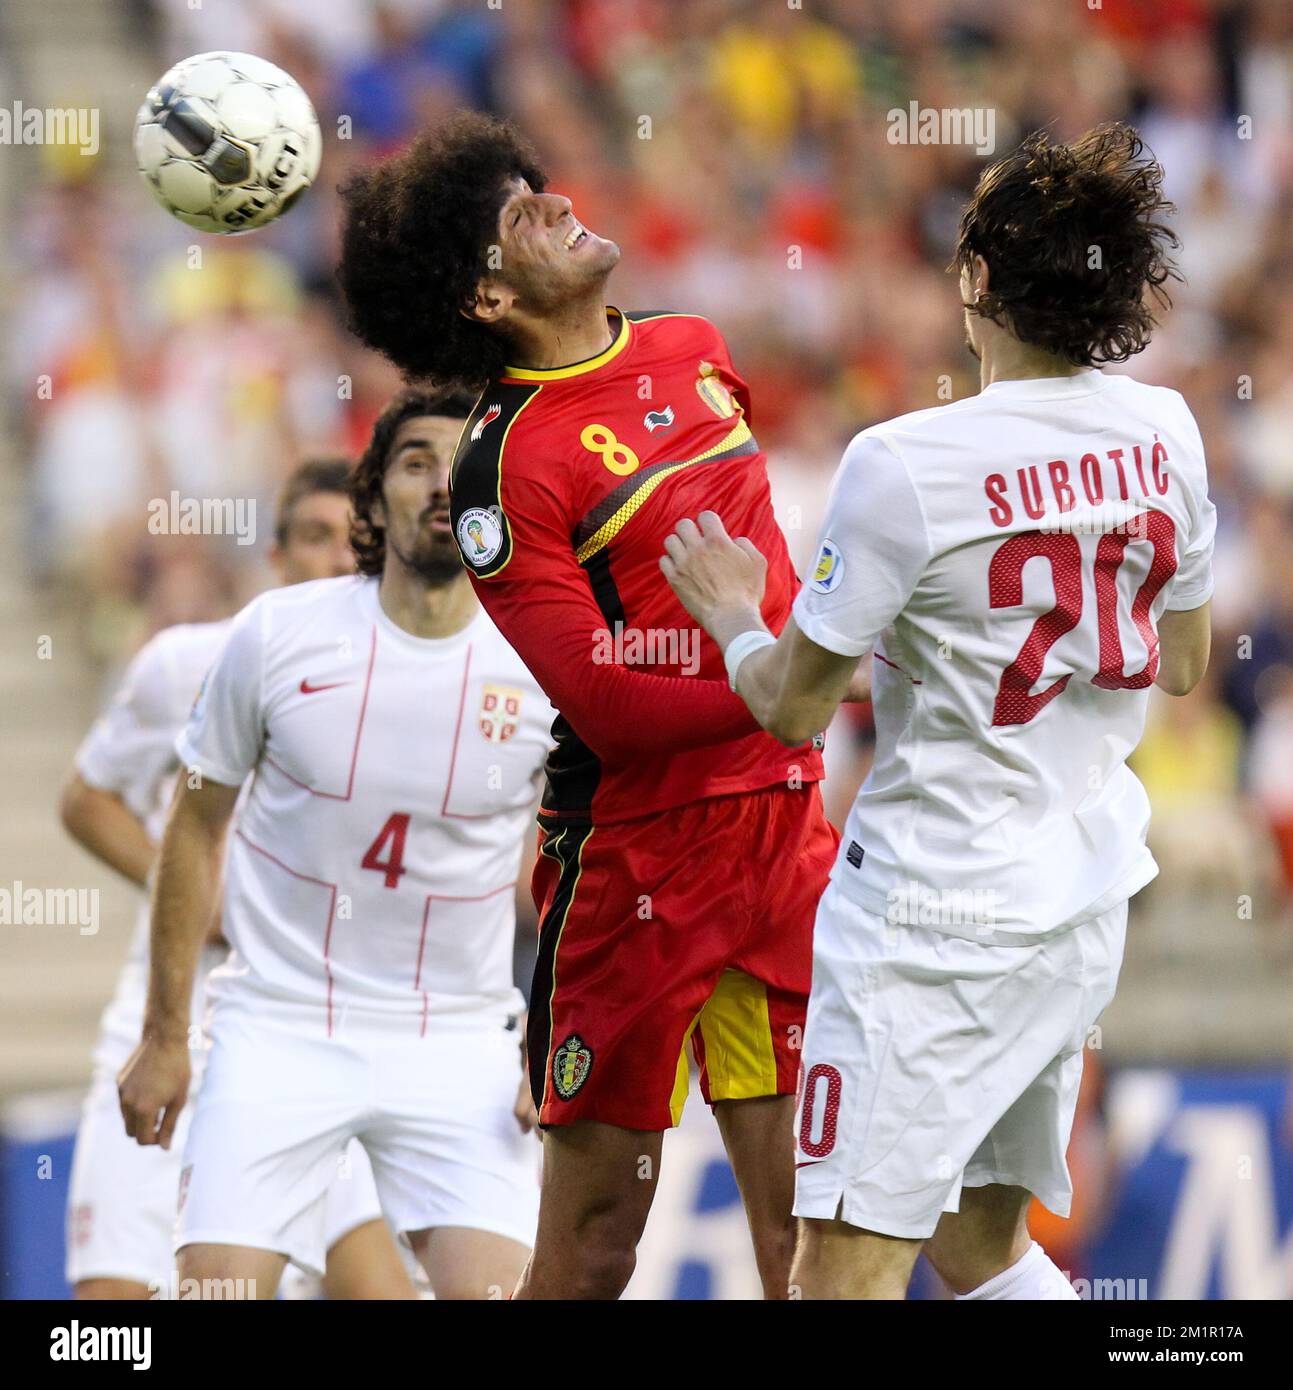 Belgium's Marouane Fellaini and Serbia's Neven Subotic fight for the ball during a match of the Belgian national soccer team 'Red Devils' against the Serbian national soccer team, Friday 07 June 2013 in Brussels. The game is part of the qualifying matches for the 2014 FIFA World Cup.  Stock Photo